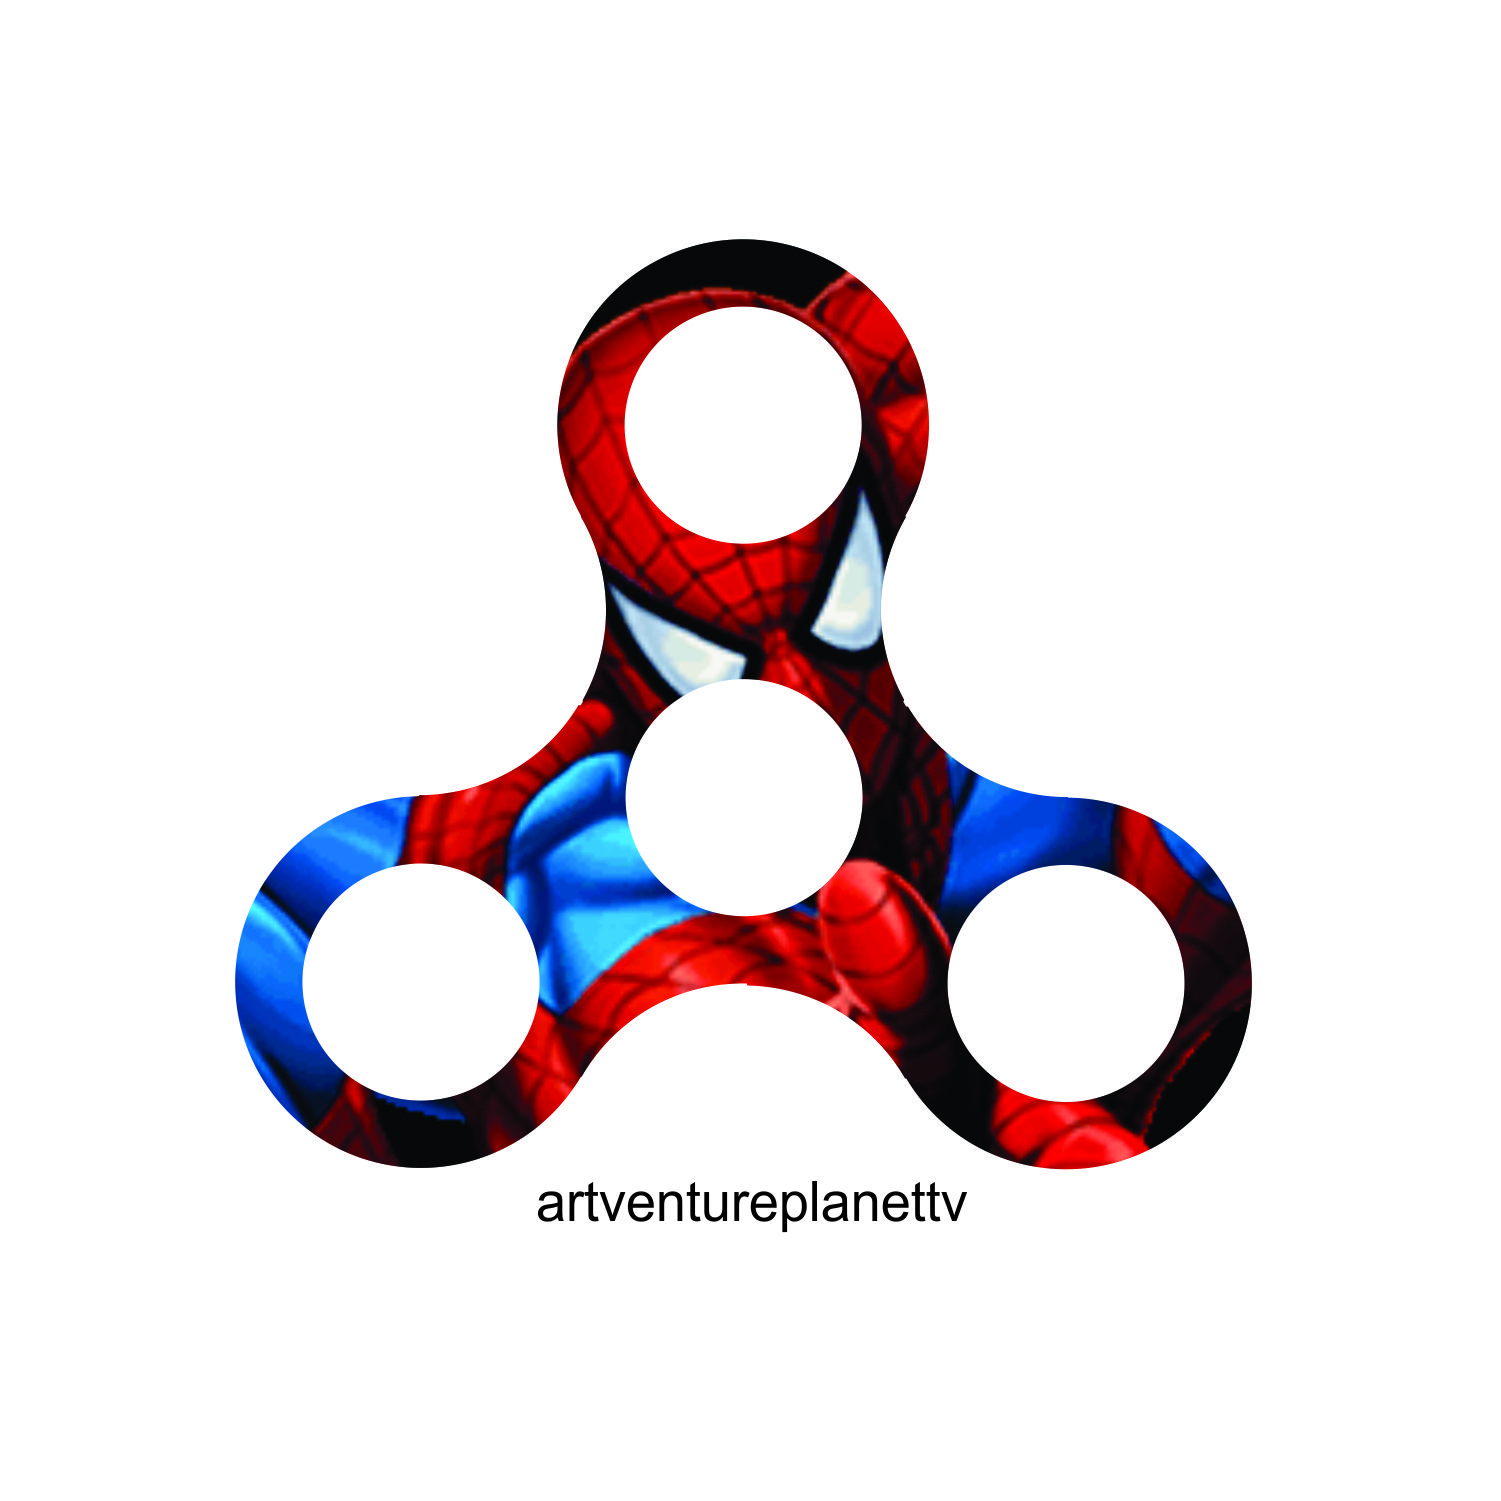 Fidget Spinner Drawing | Free download on ClipArtMag